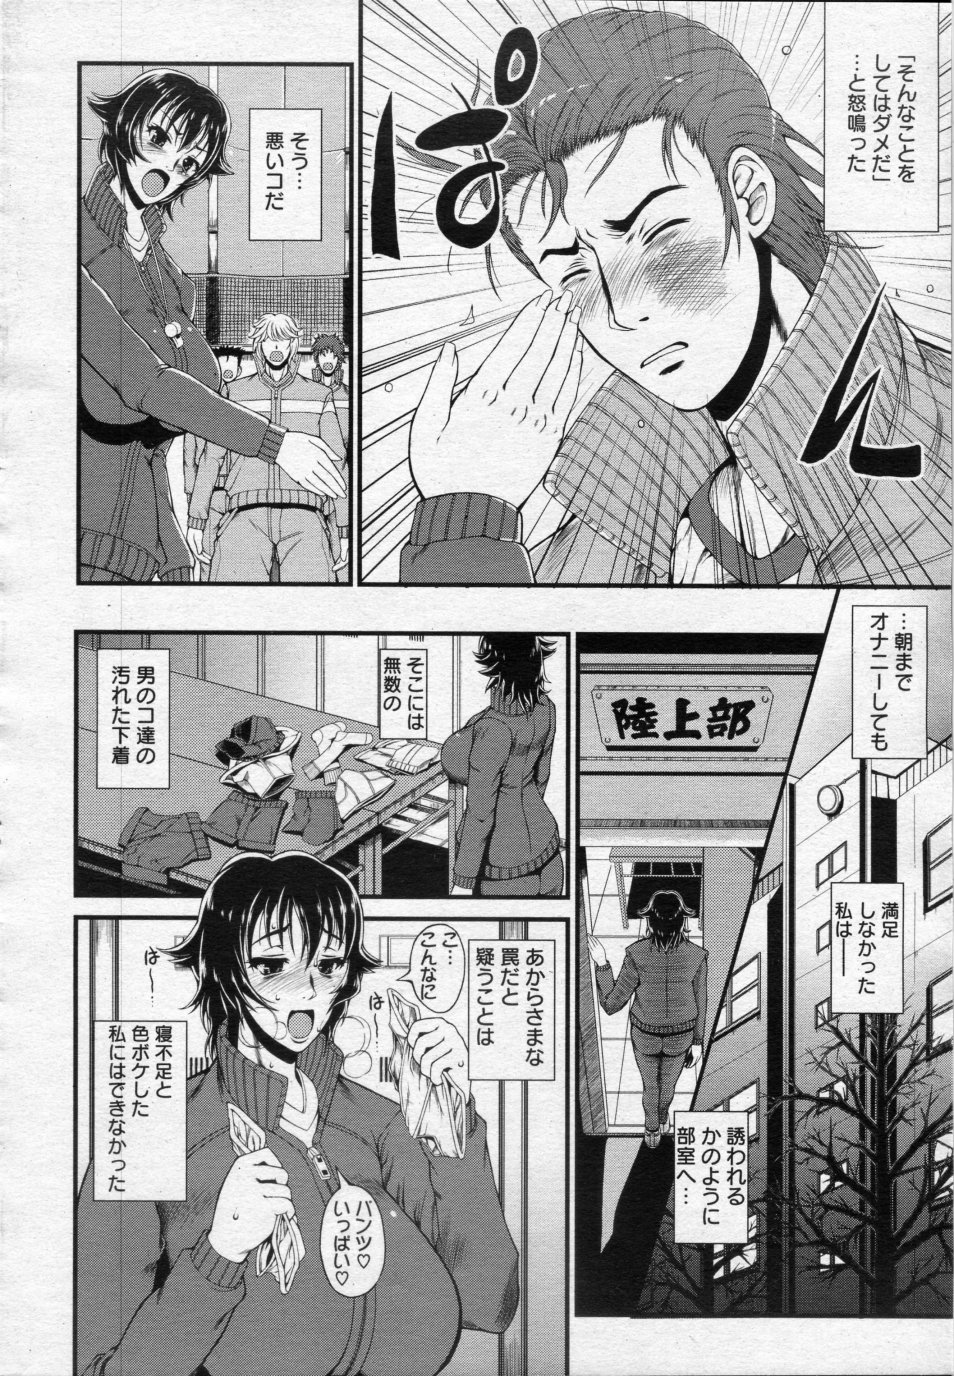 [Tousei Oume] Inmen Kyoushi Ch.01-02 (Complete) [とうせいおうめ] 淫面教師 前・後編